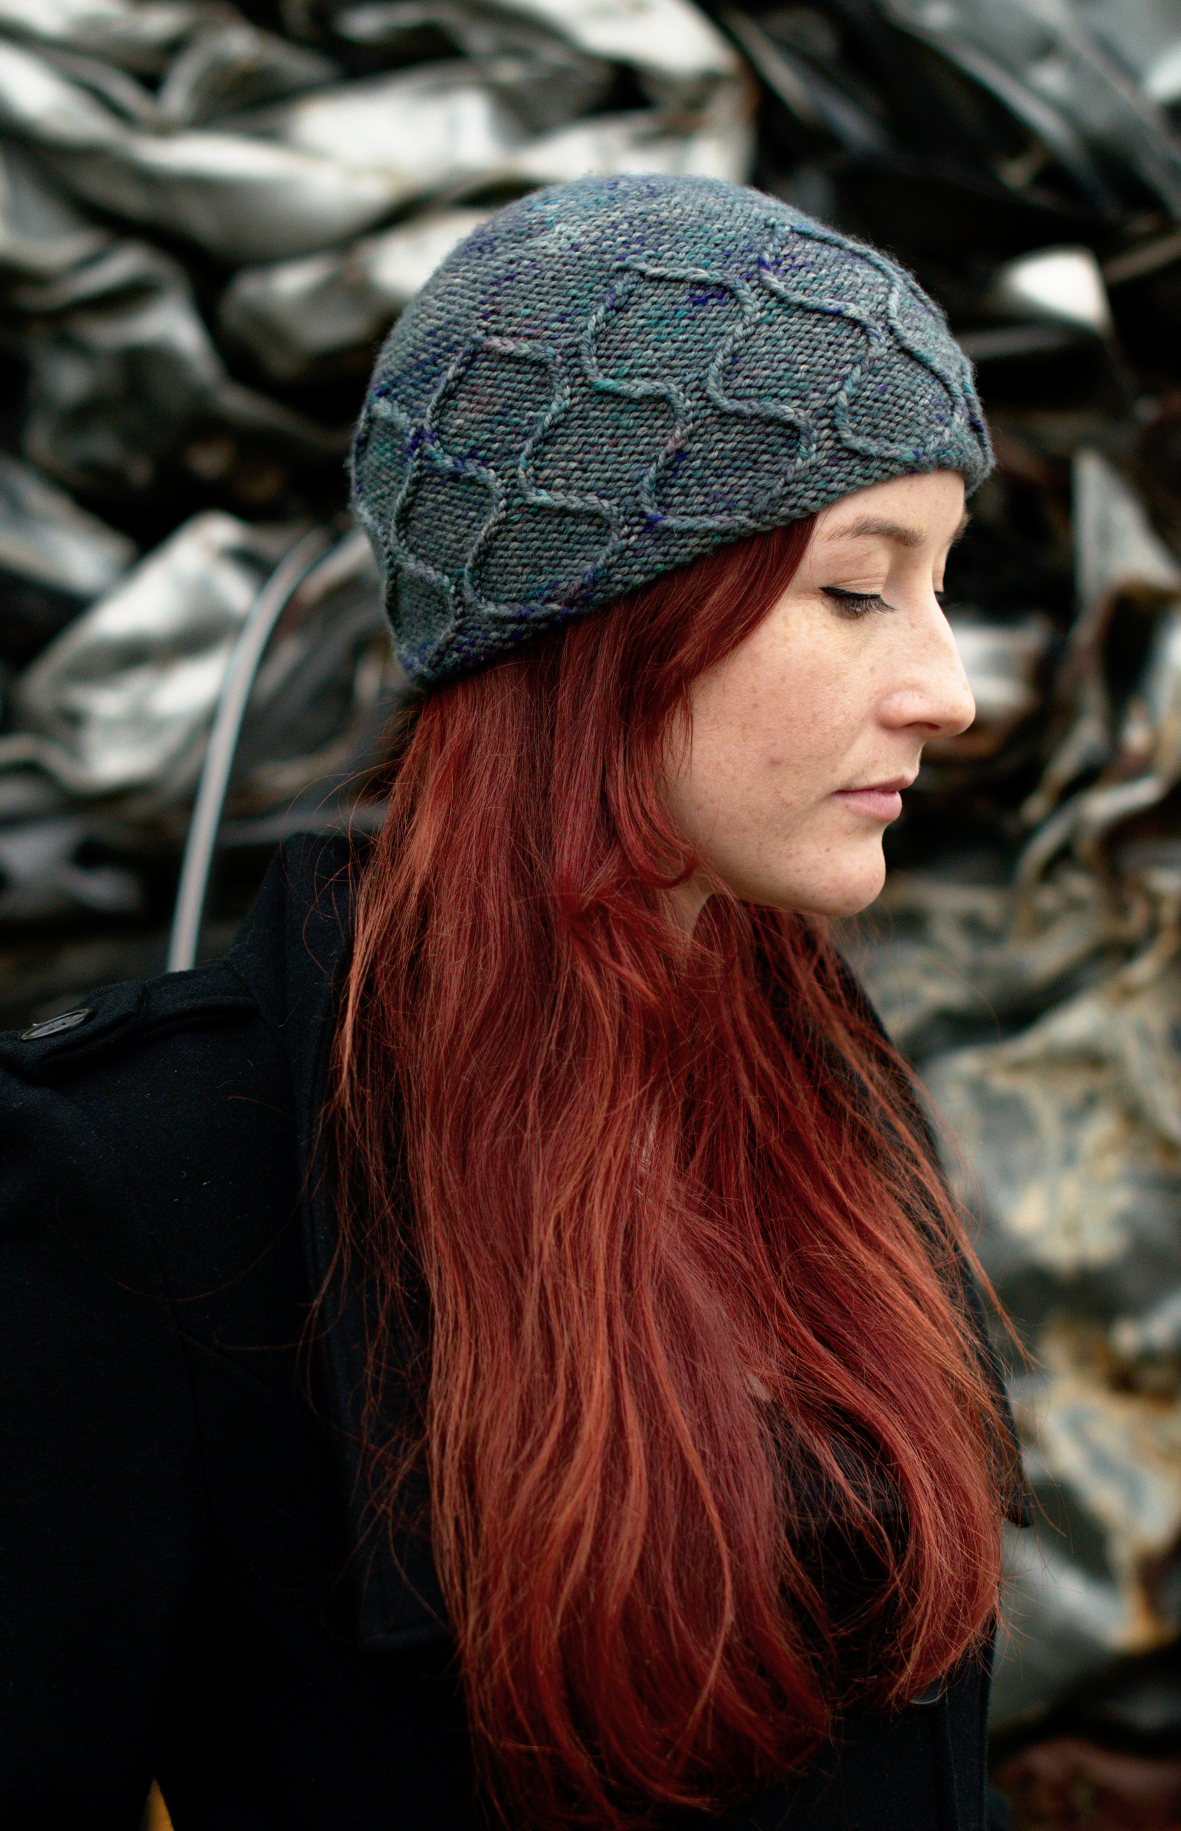 Filigree Beanie hand knitting pattern for worsted weight yarns